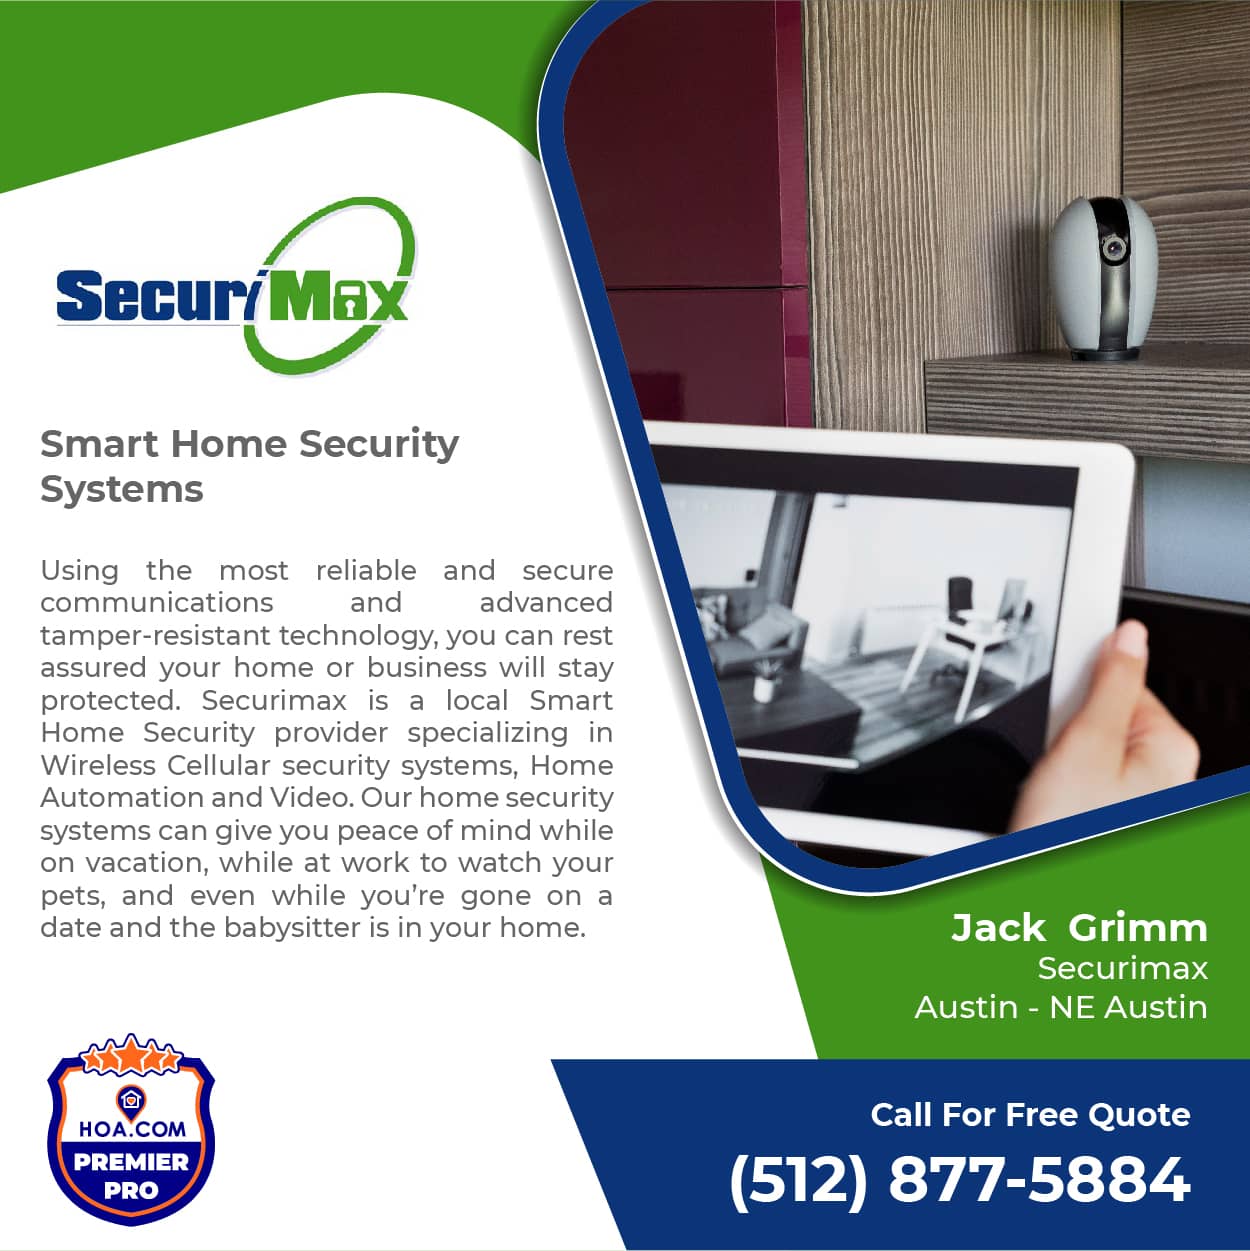 Securimax Smart Home Security Systems